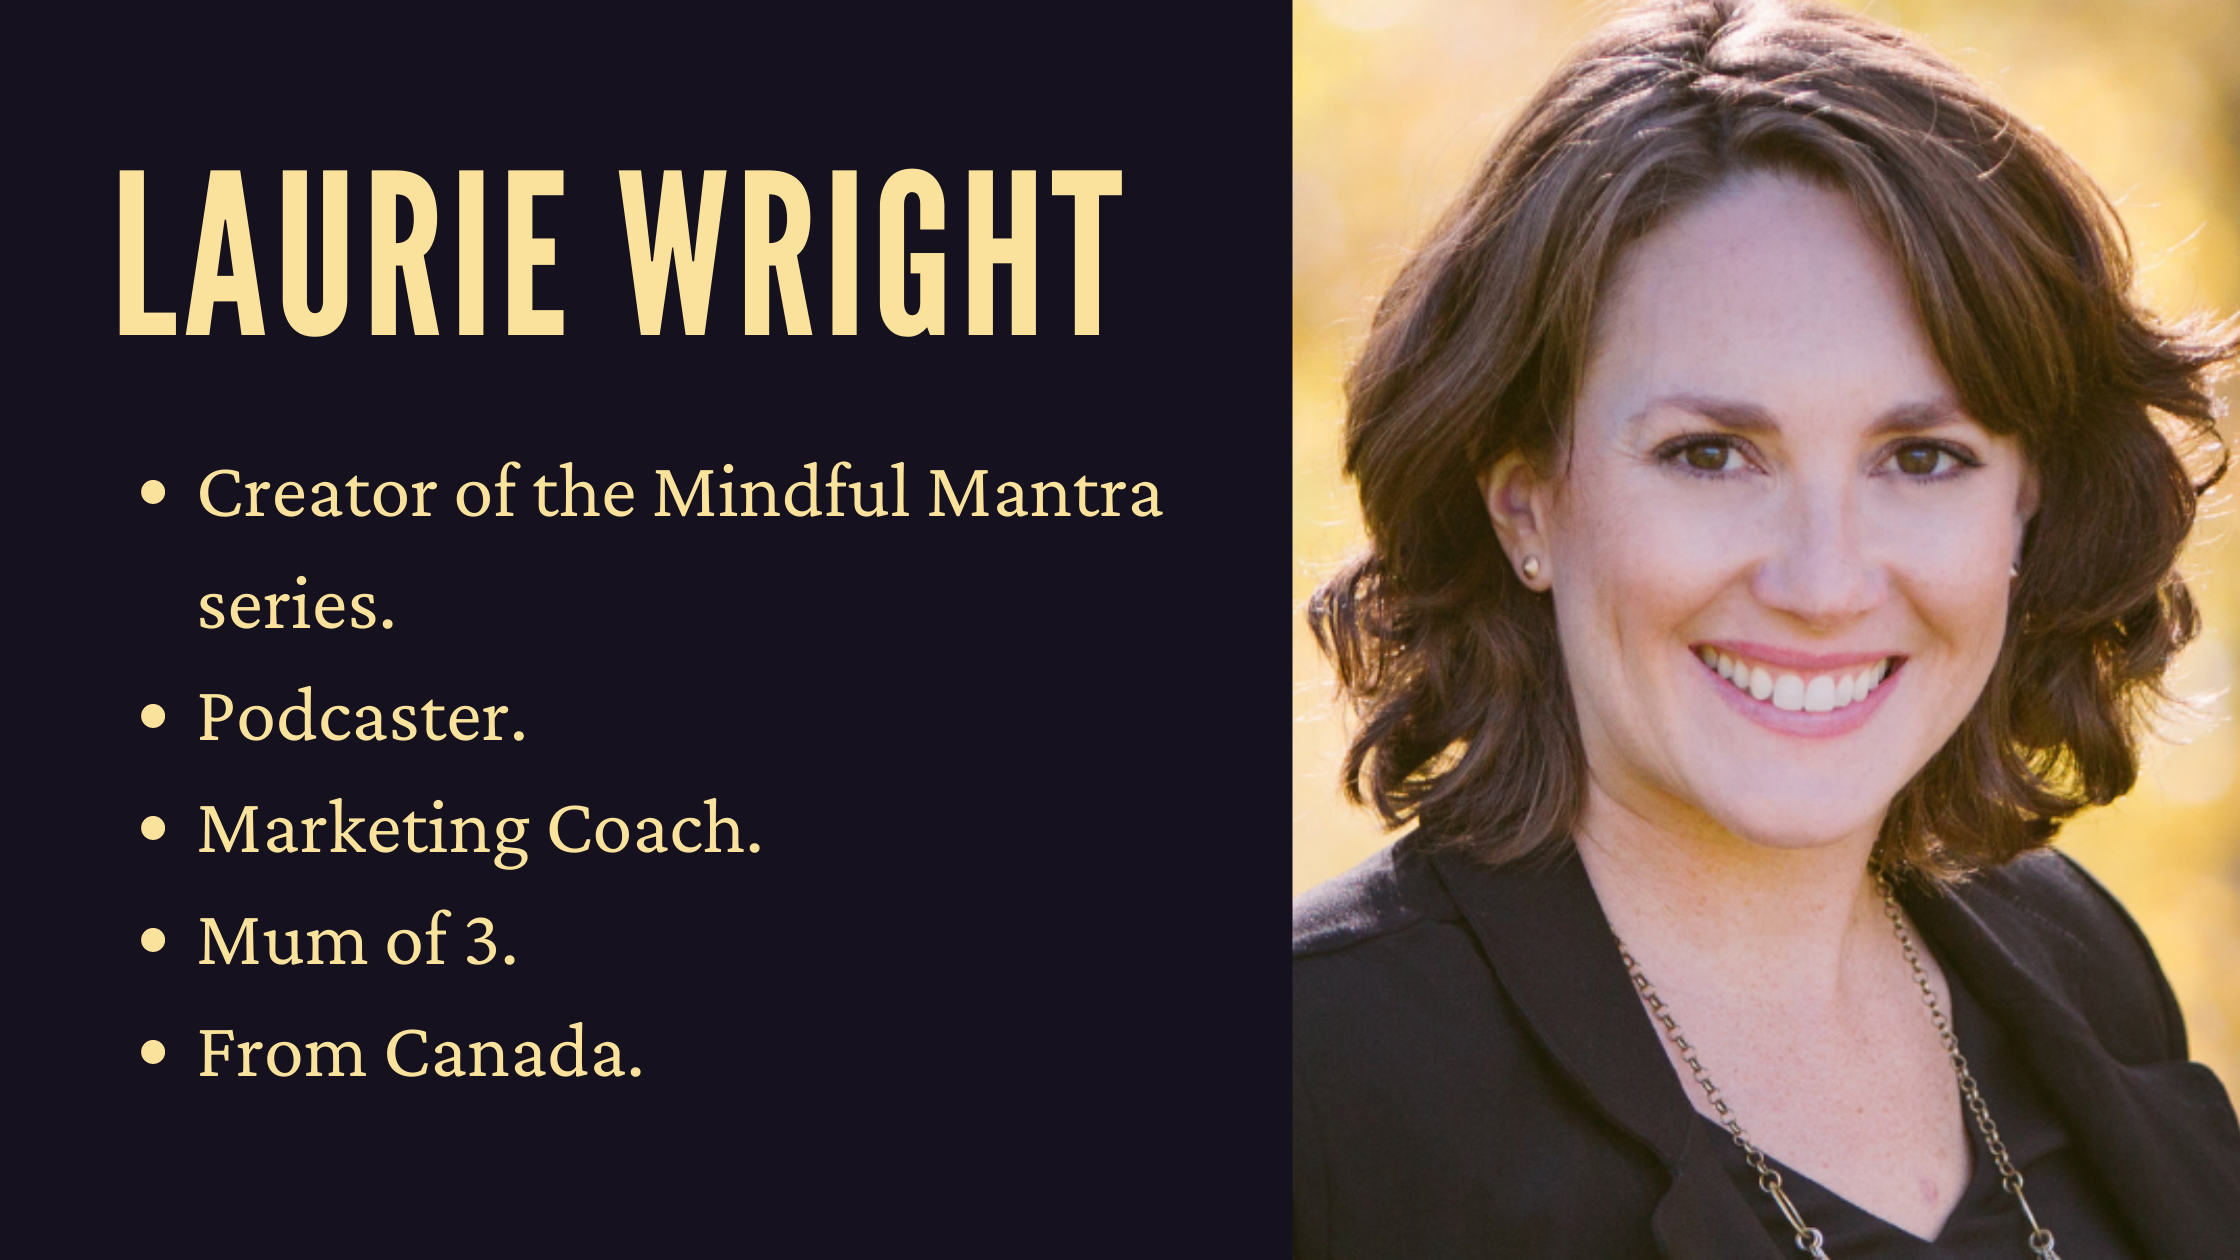 The Wright Mantra For Your Child! Meet Laurie Wright.